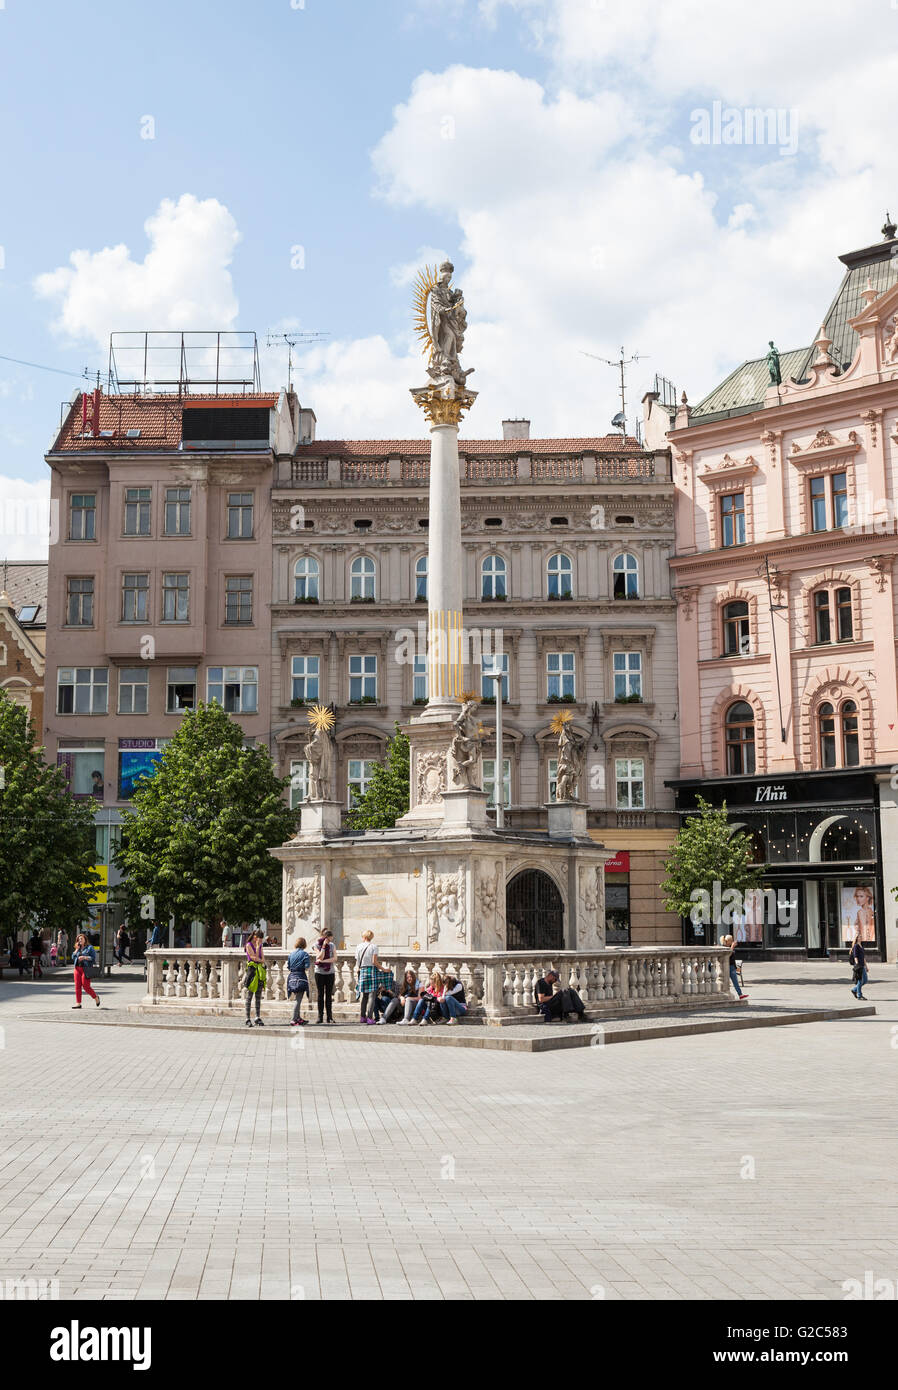 Svobody square with the Plague column in central Brno Czech Republic Europe Stock Photo